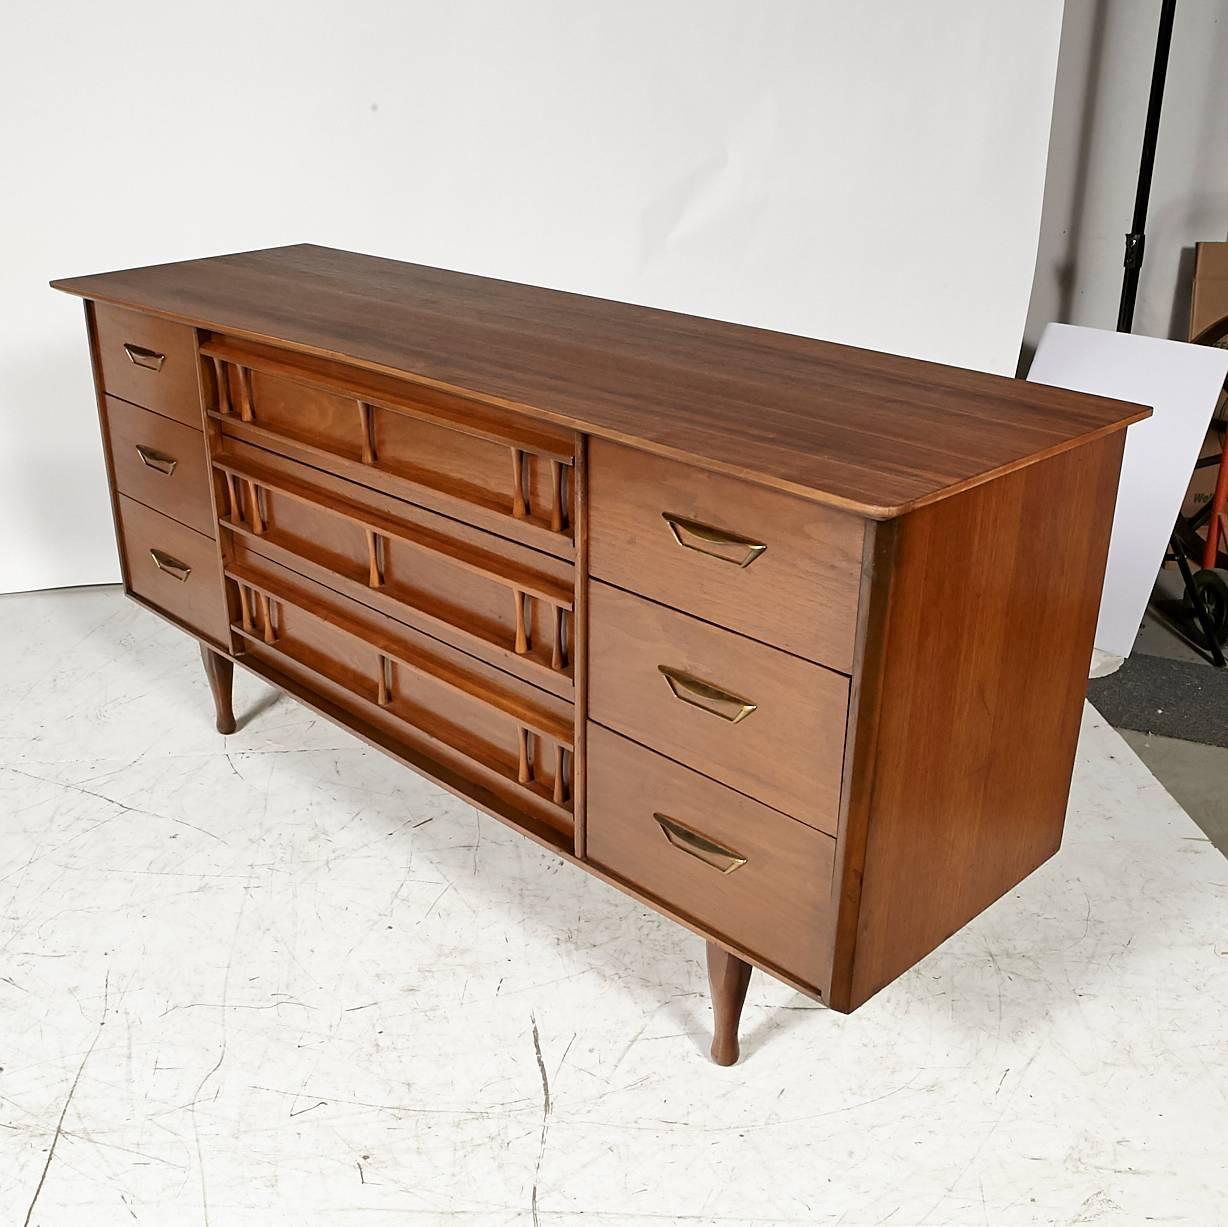 1960s Unagusta Walnut Wood Low Dresser In Excellent Condition For Sale In Amherst, NH